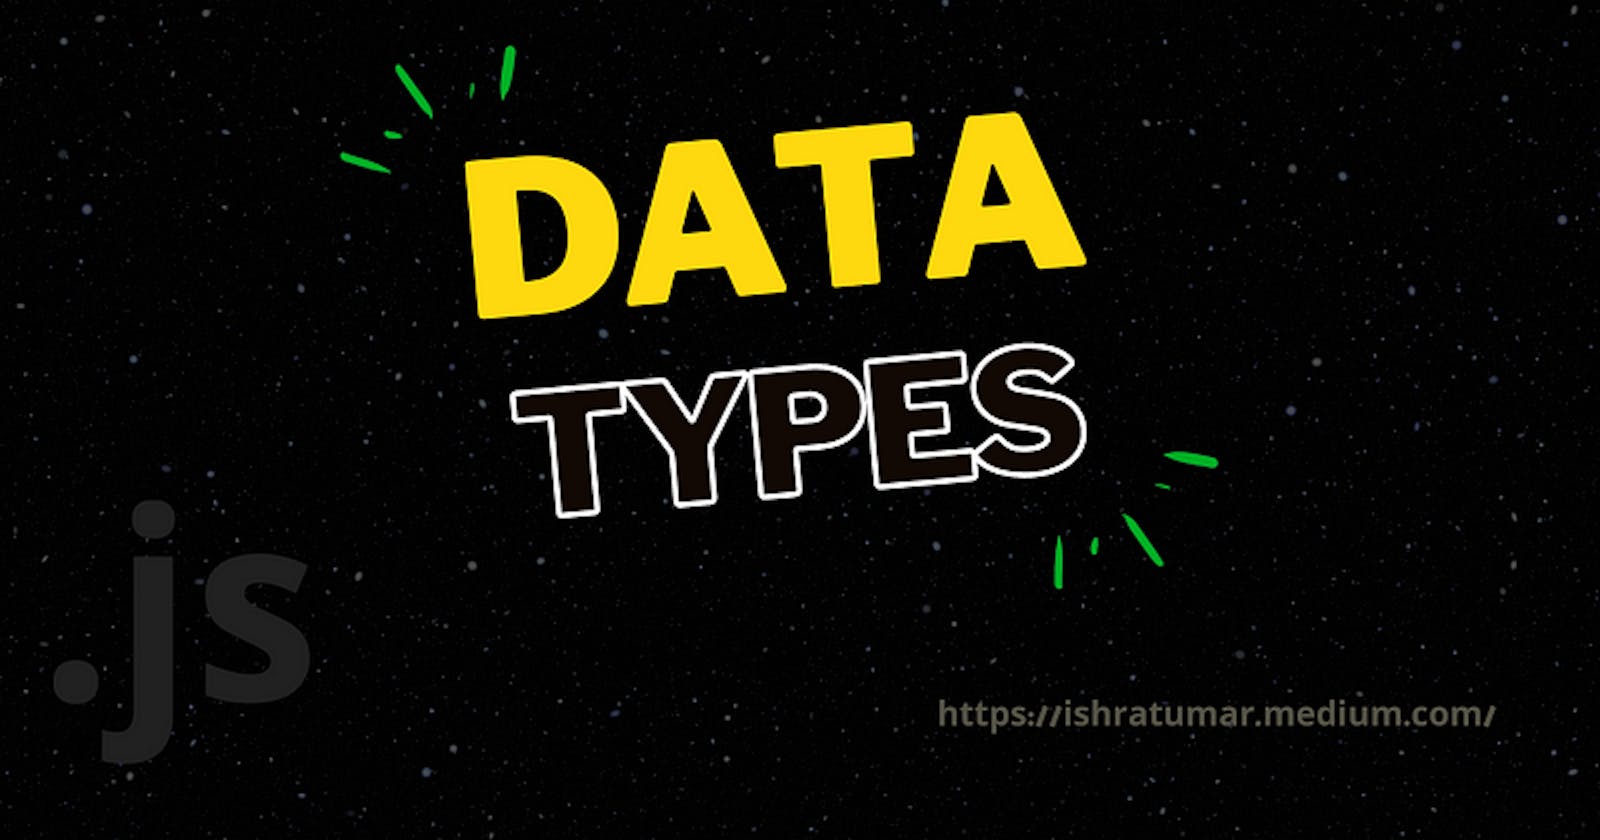 What are Data Types in JavaScript